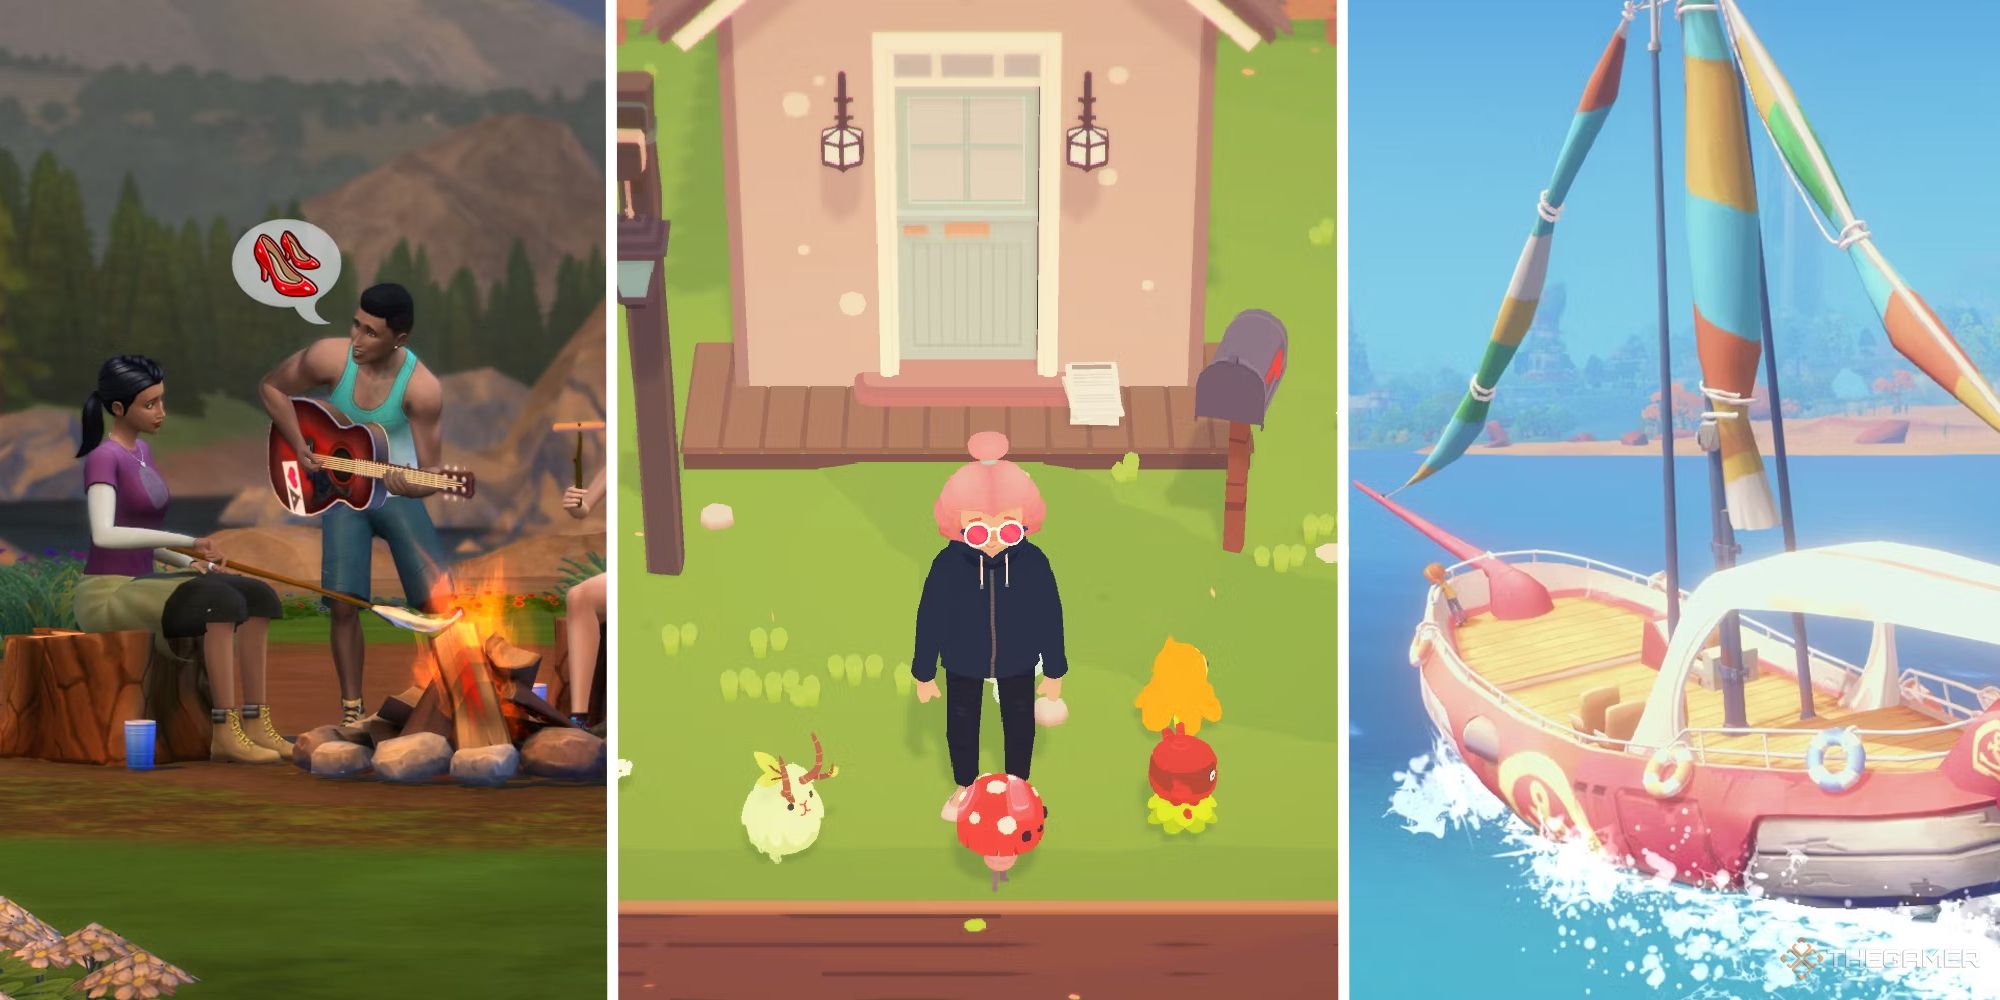 split image showing the sims, ooblets, and my time at portia